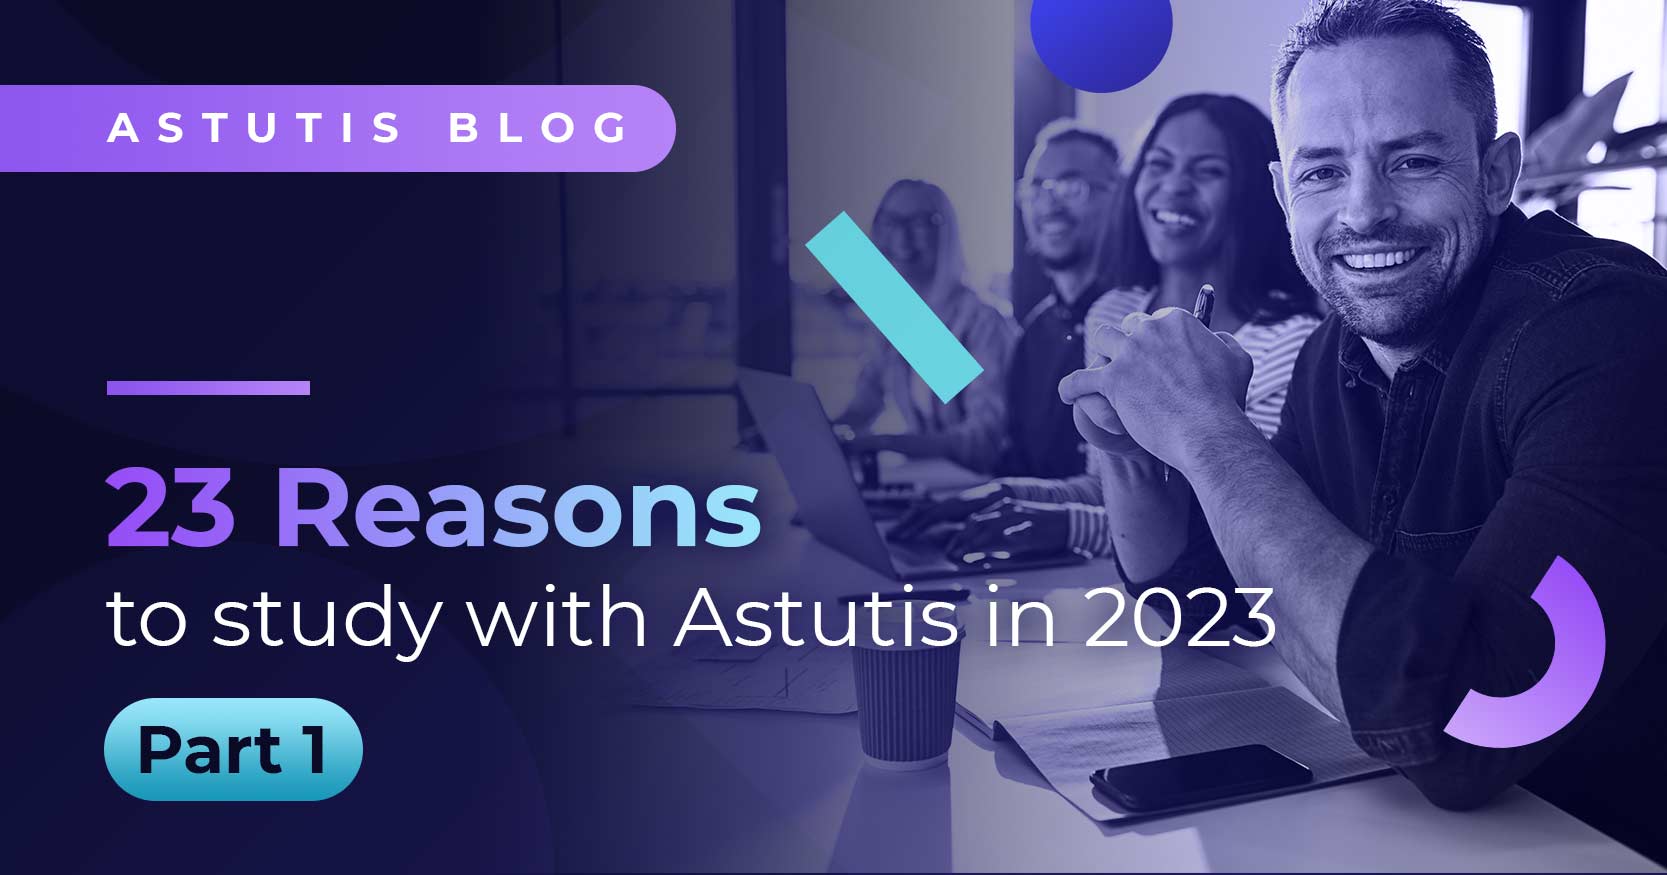 23 Reasons to Study With Astutis in 2023: Part One Image